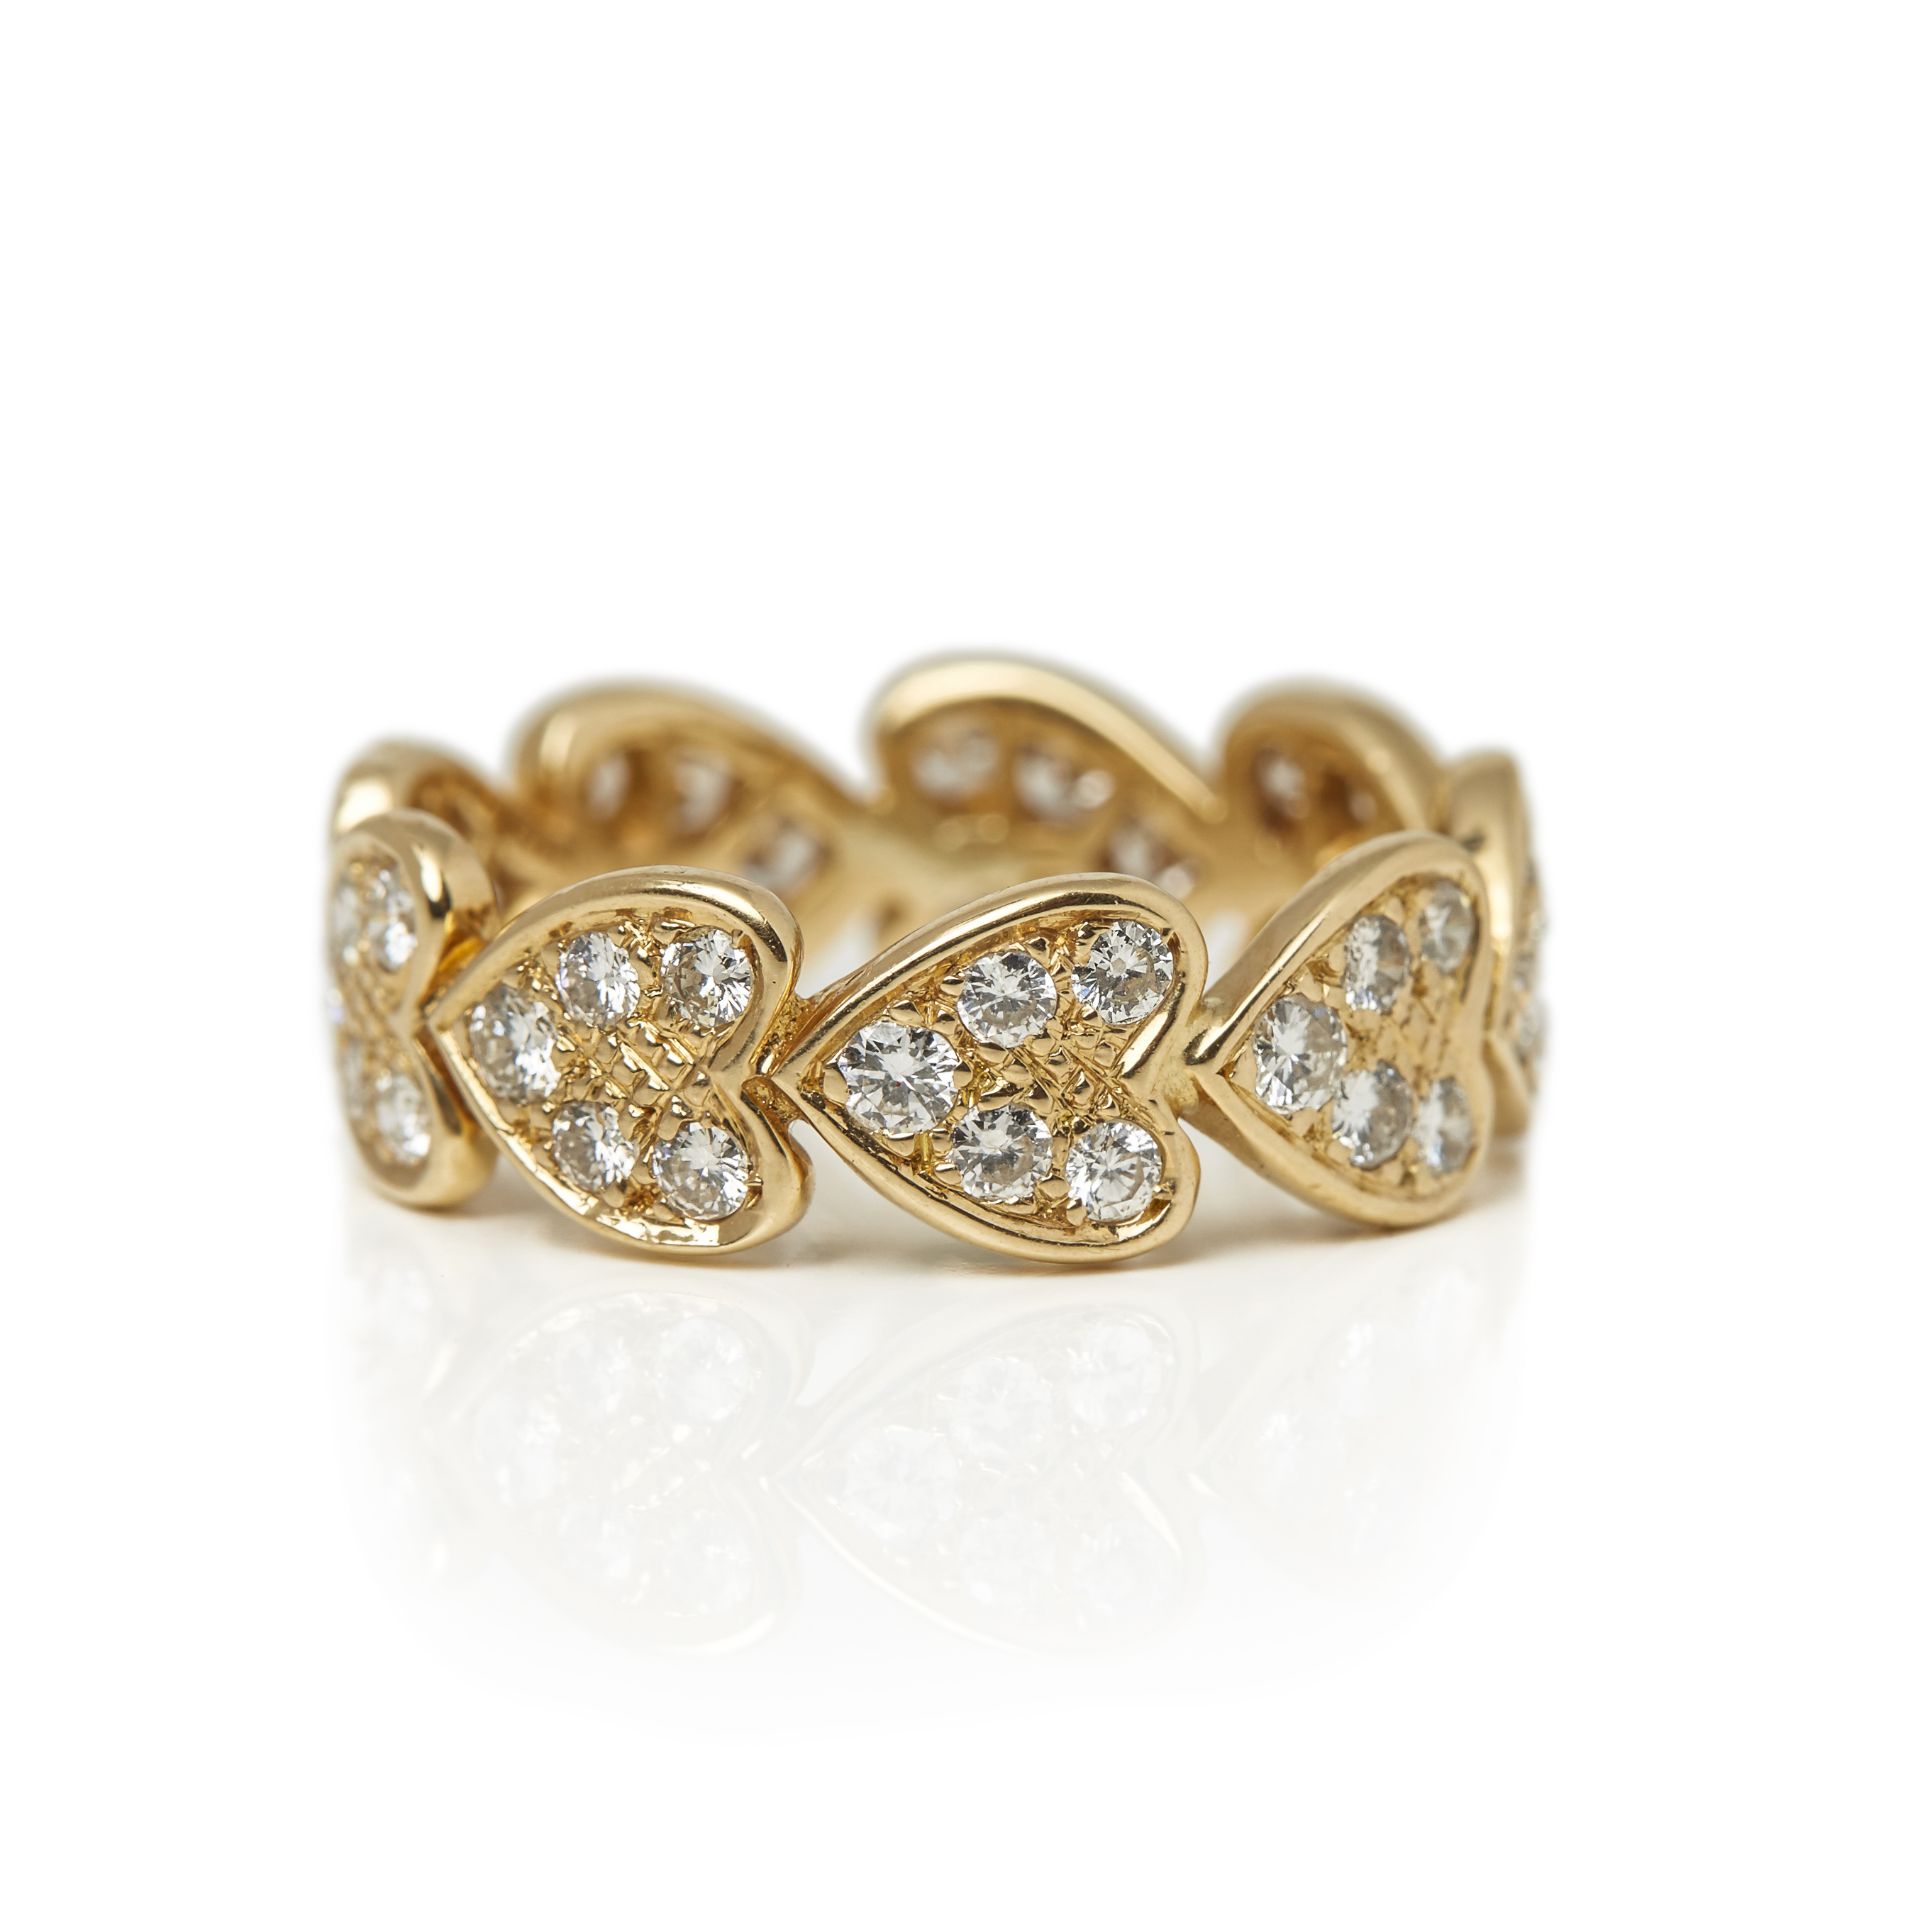 Cartier 18k Yellow Gold Diamond Heart Ring - Image 13 of 23